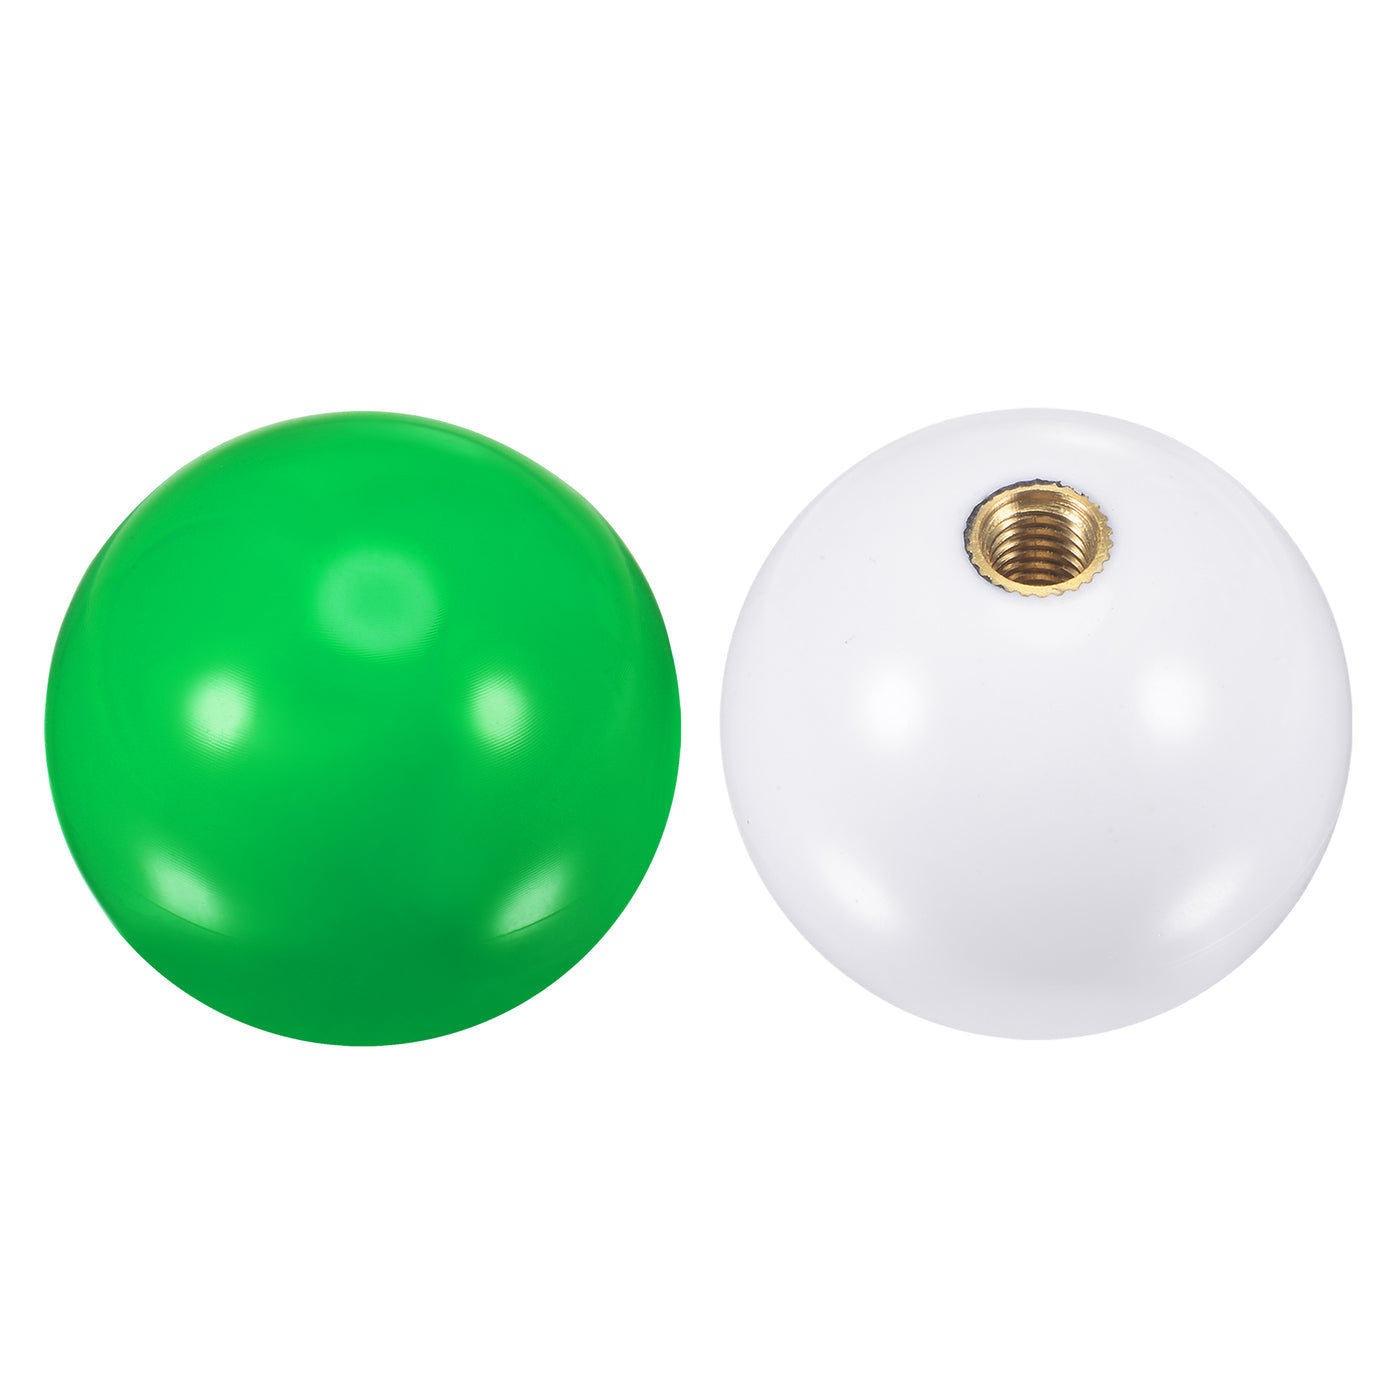 uxcell Uxcell Joystick Head Rocker Ball Top Handle Arcade Game Replacement Green/White